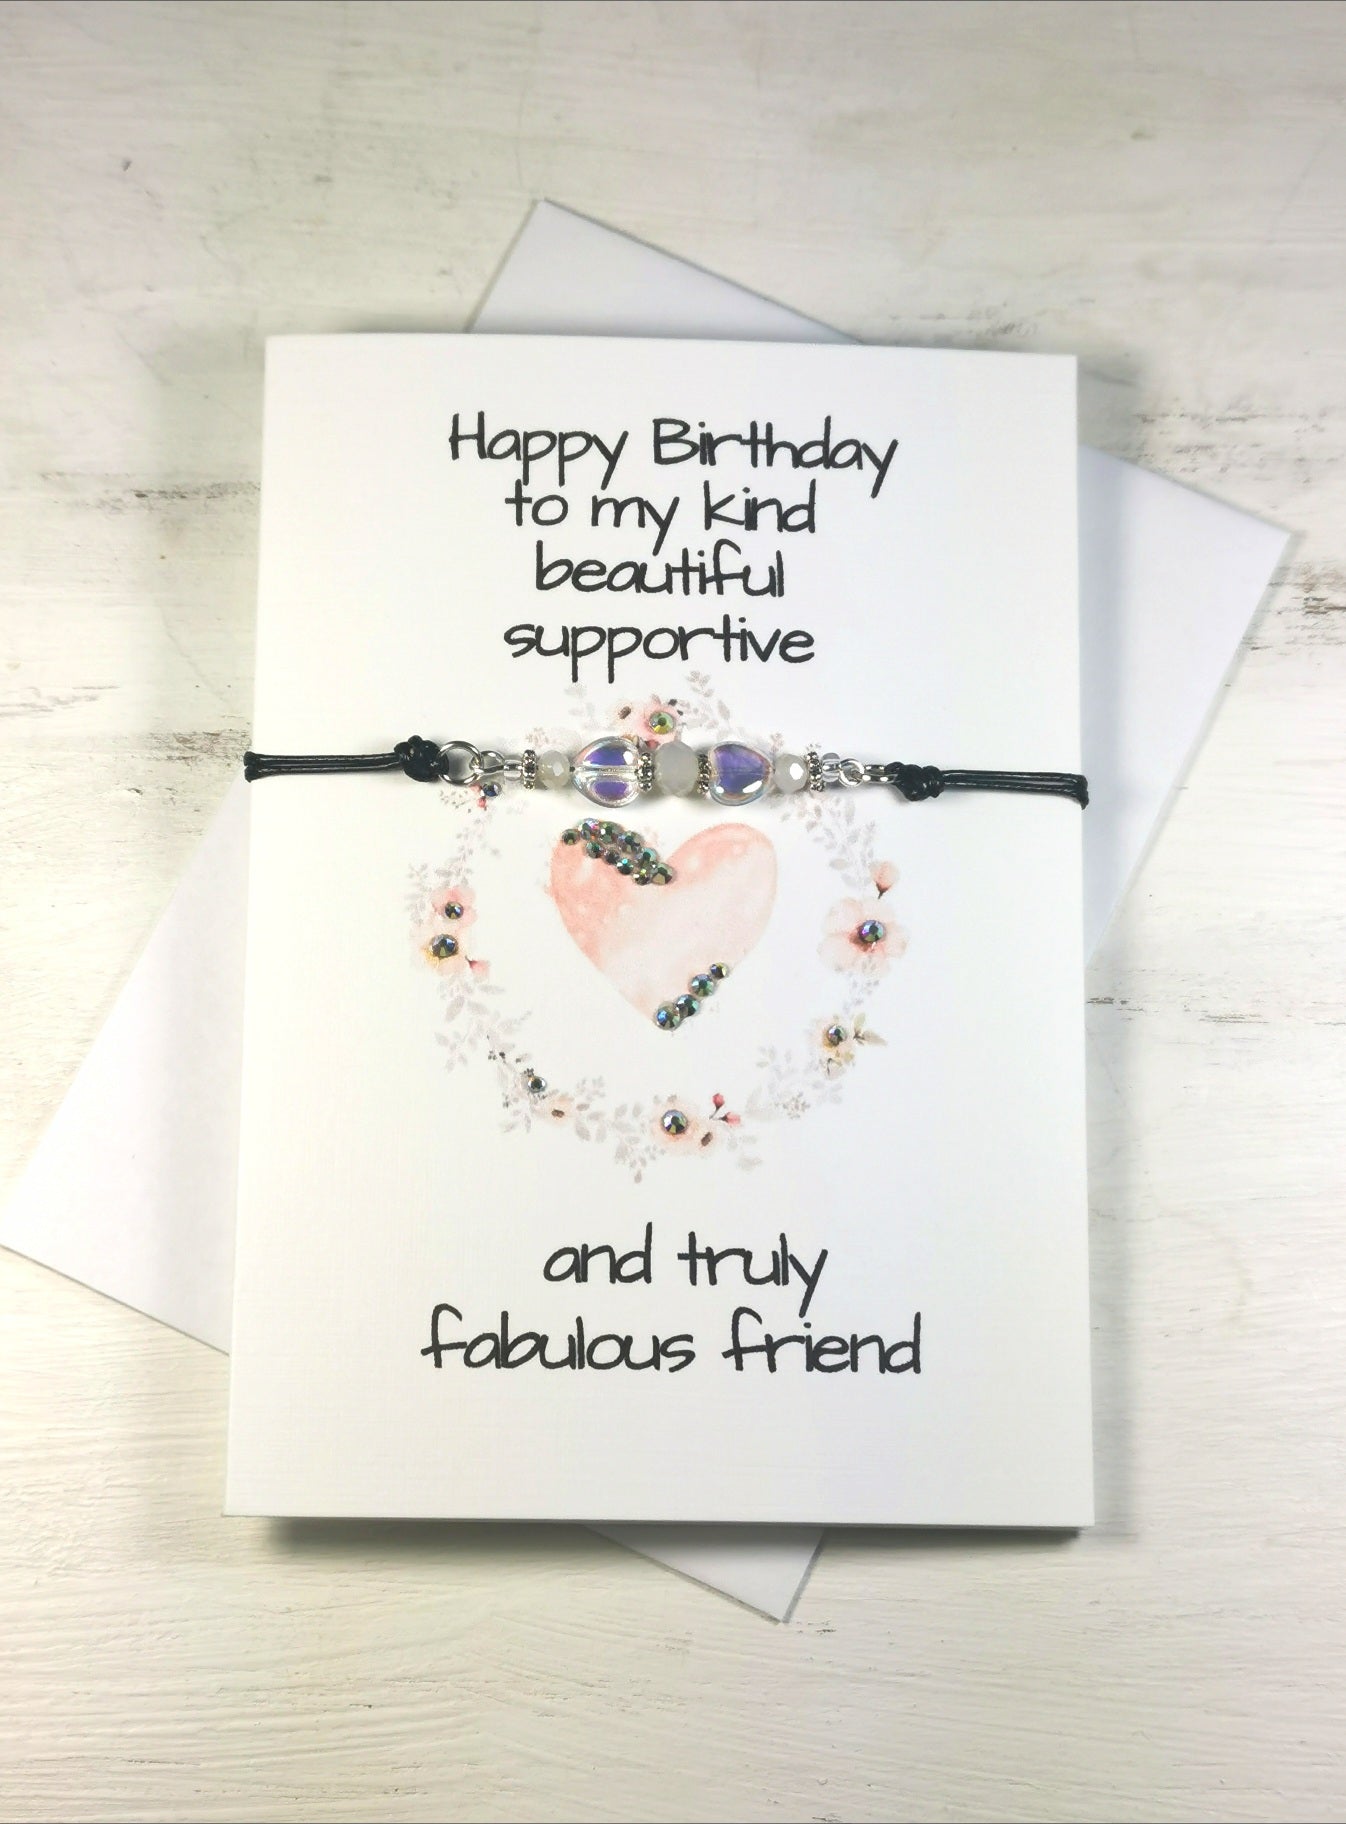 Happy Birthday to my Kind Beautiful supportive and truly Fabulous Friend Bracelet Gift Card